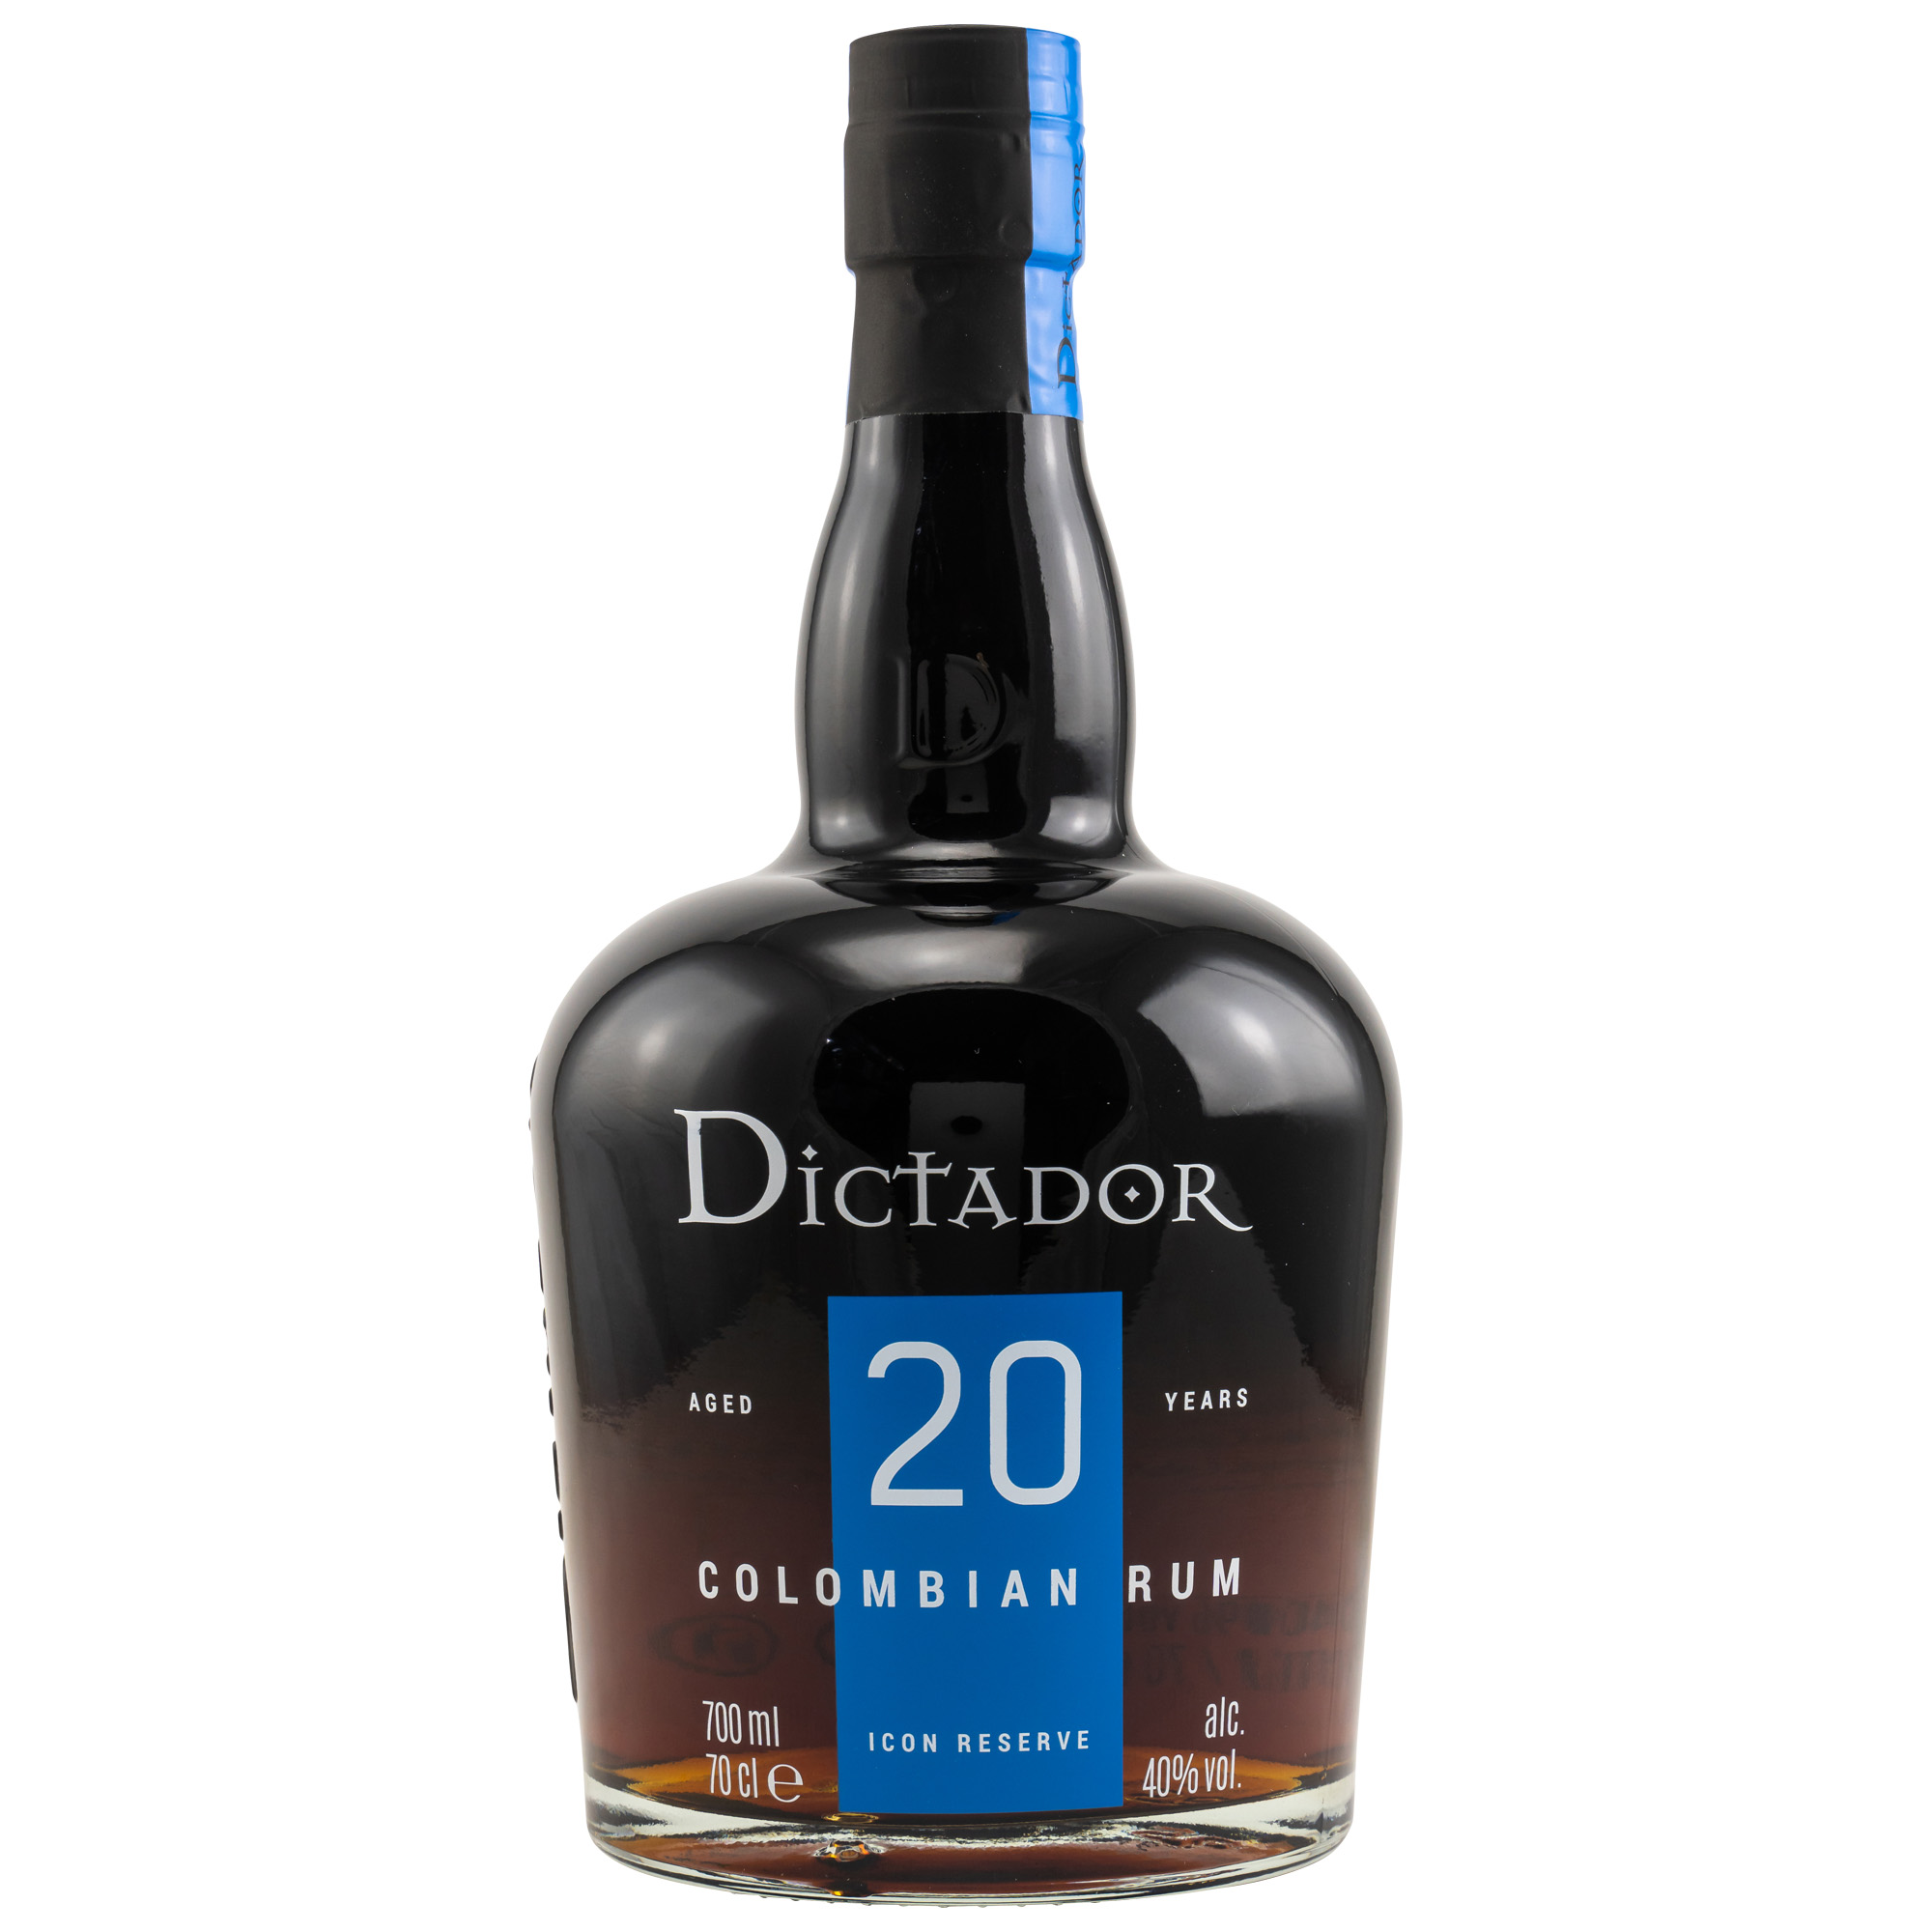 Dictador Icon Reserve Colombian Rum - 20 Years 0,7l 40%vol.